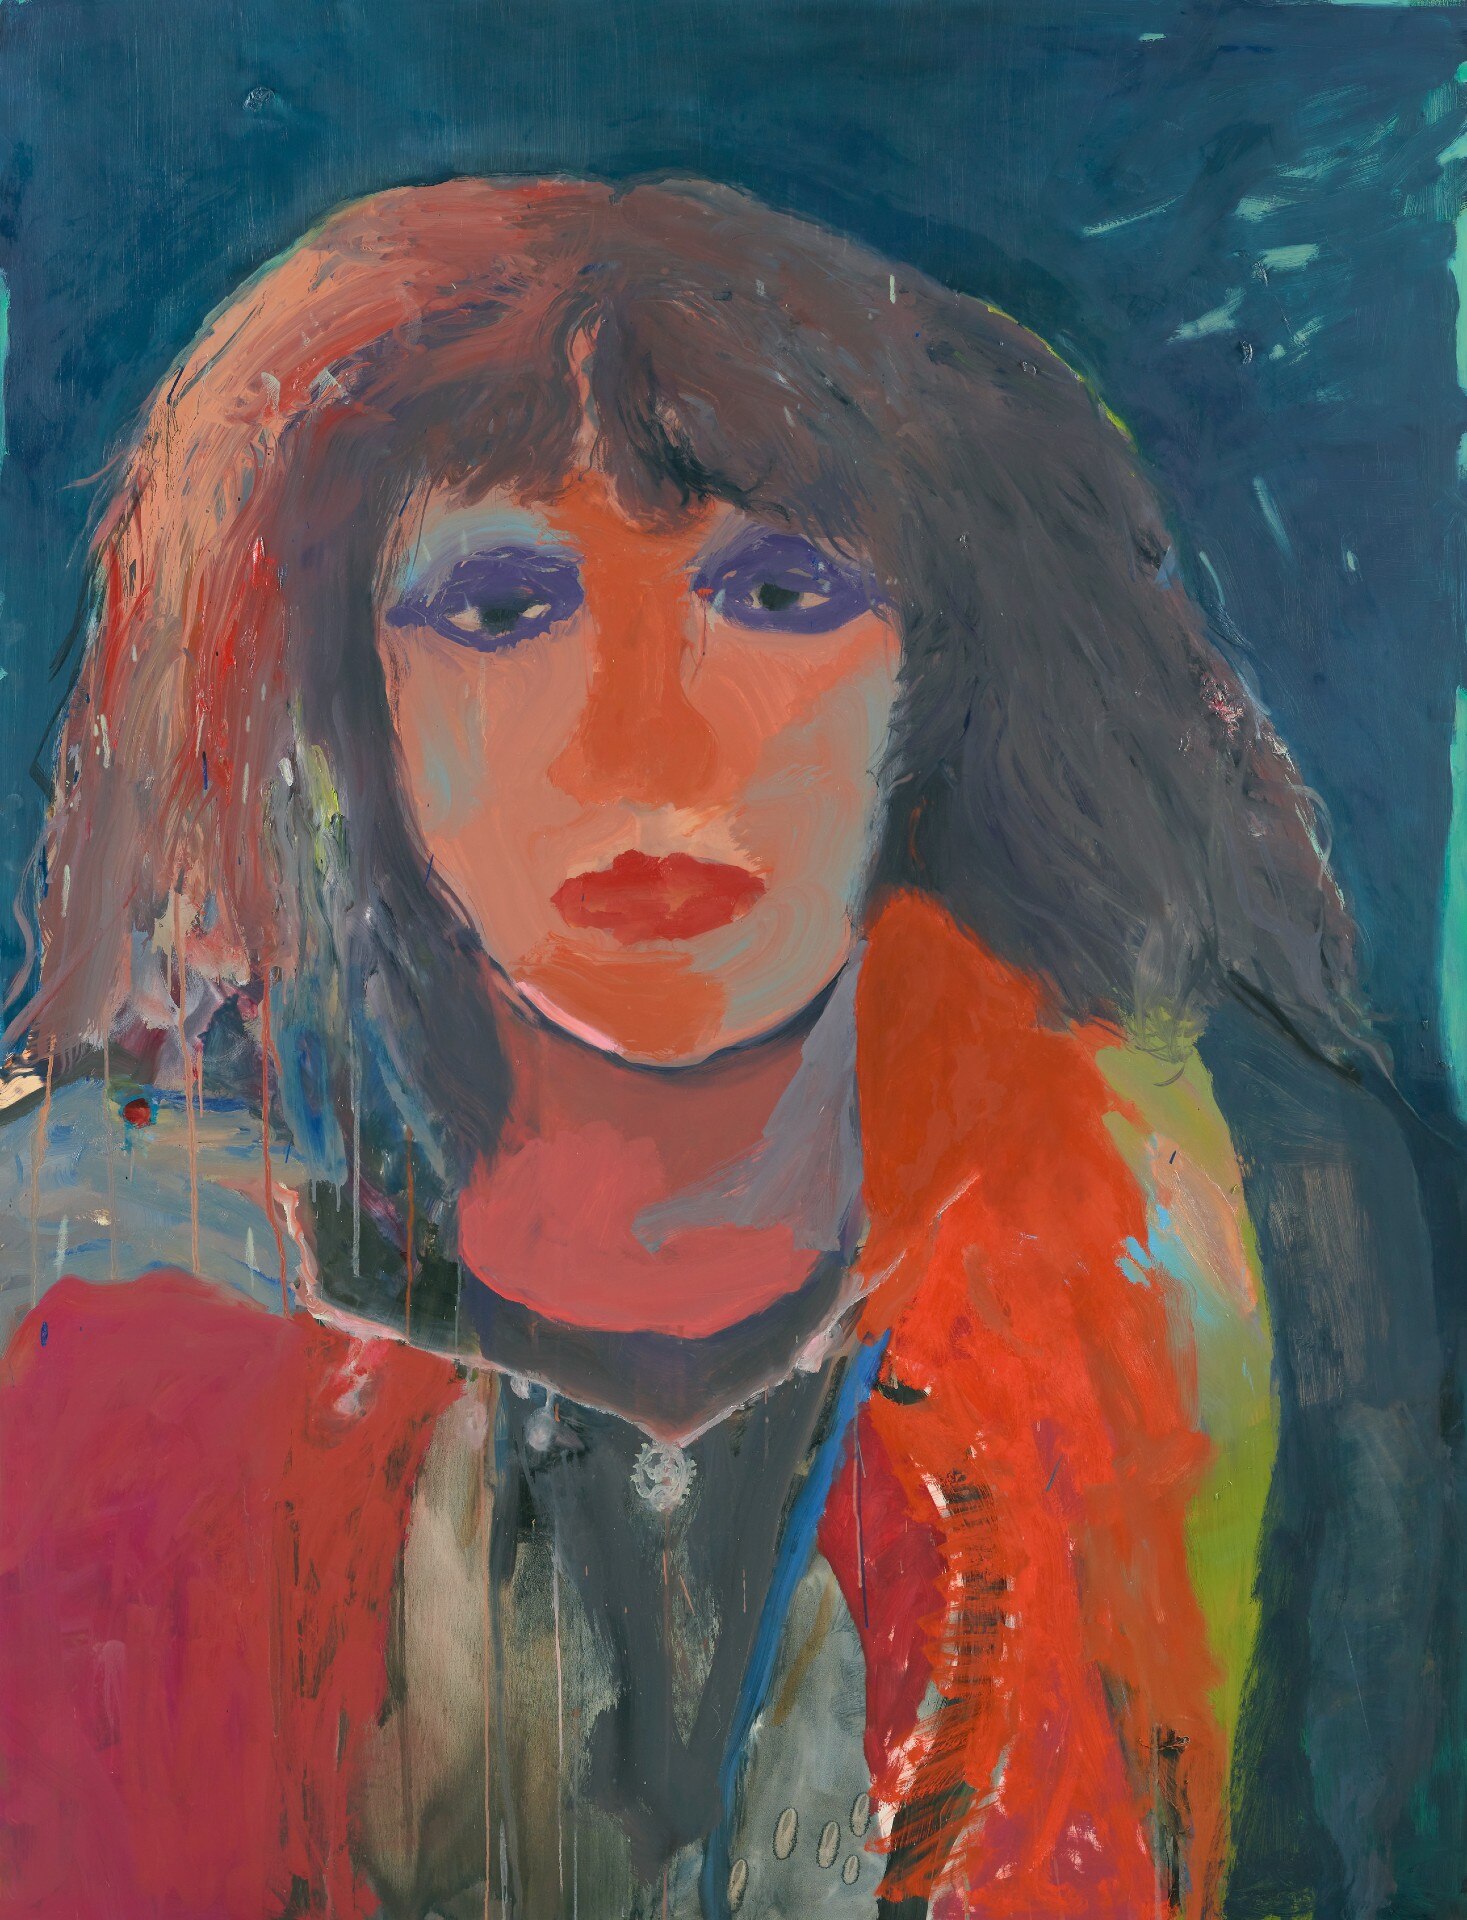 A colourful and abstract painting of Professor Chandini Raina Macintrye, her eyes framed with purple